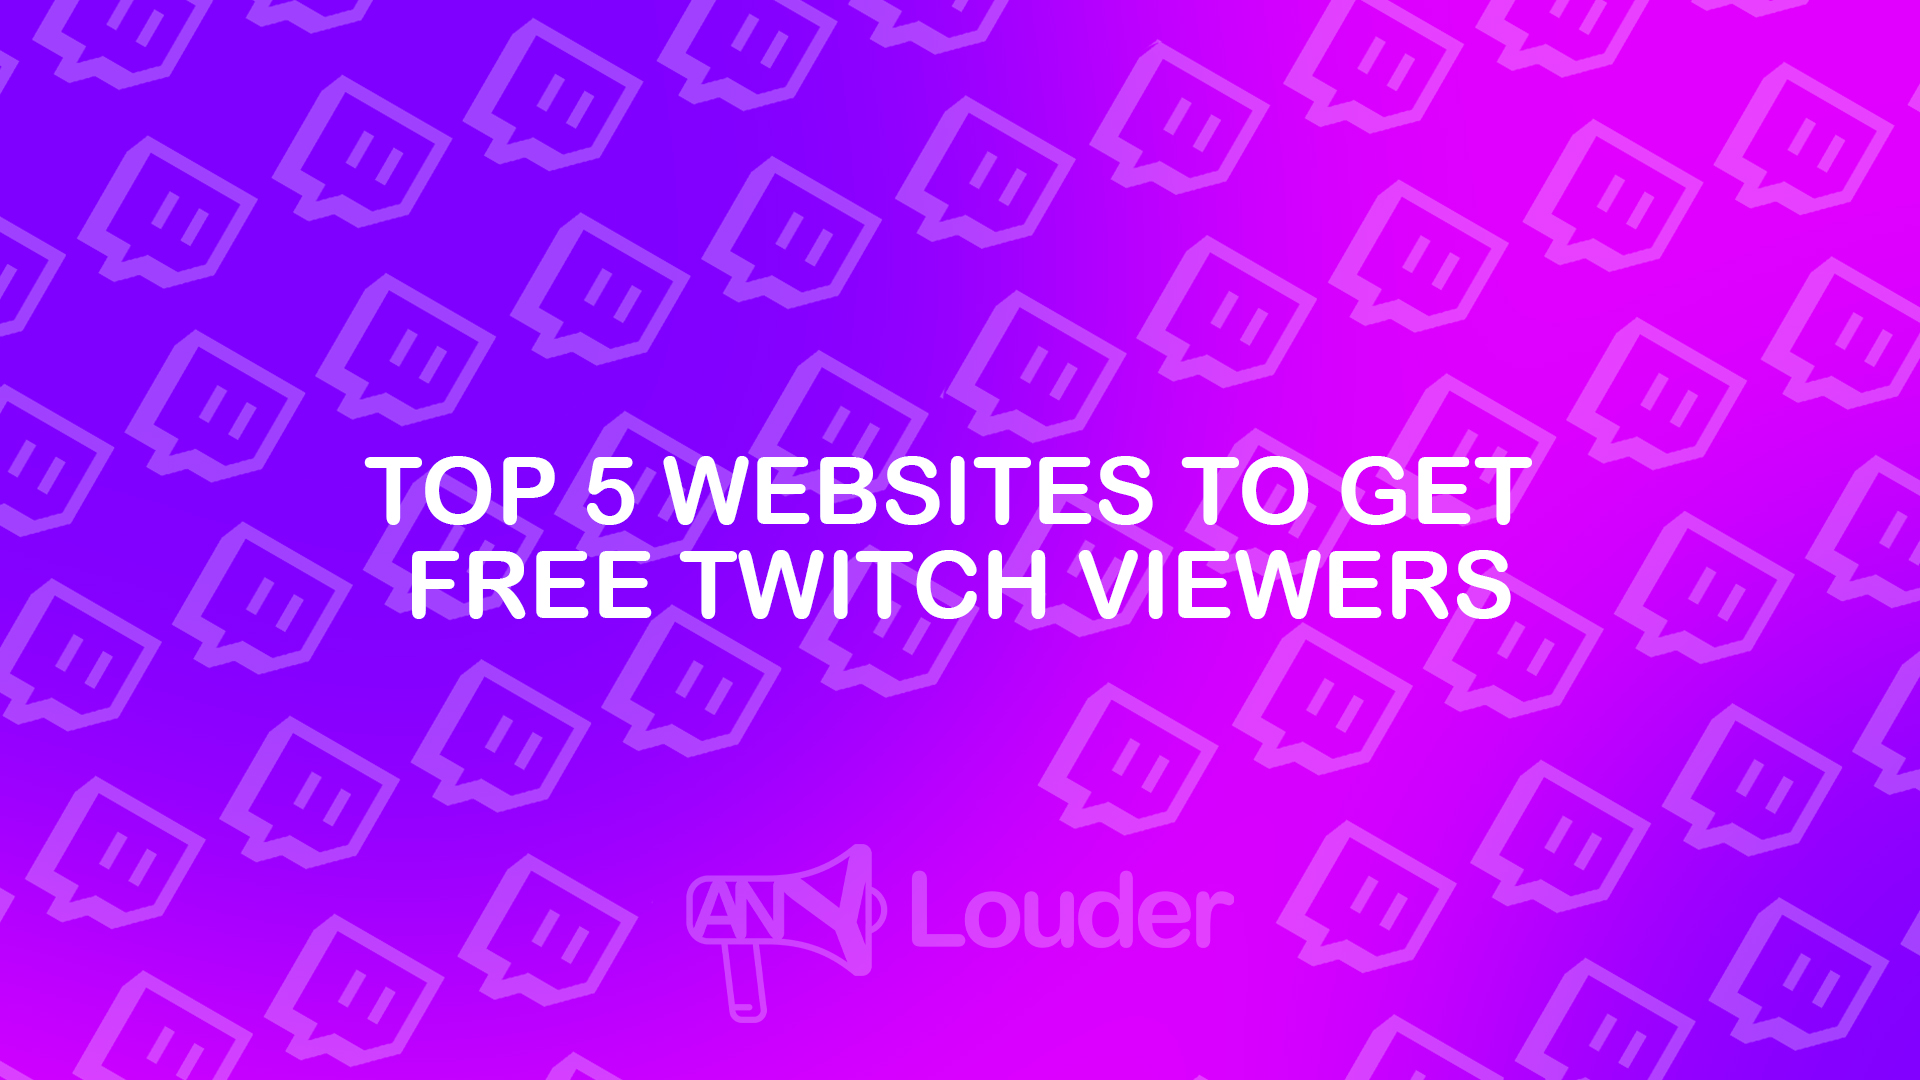 Top 5 Websites to Get Free Twitch Viewers